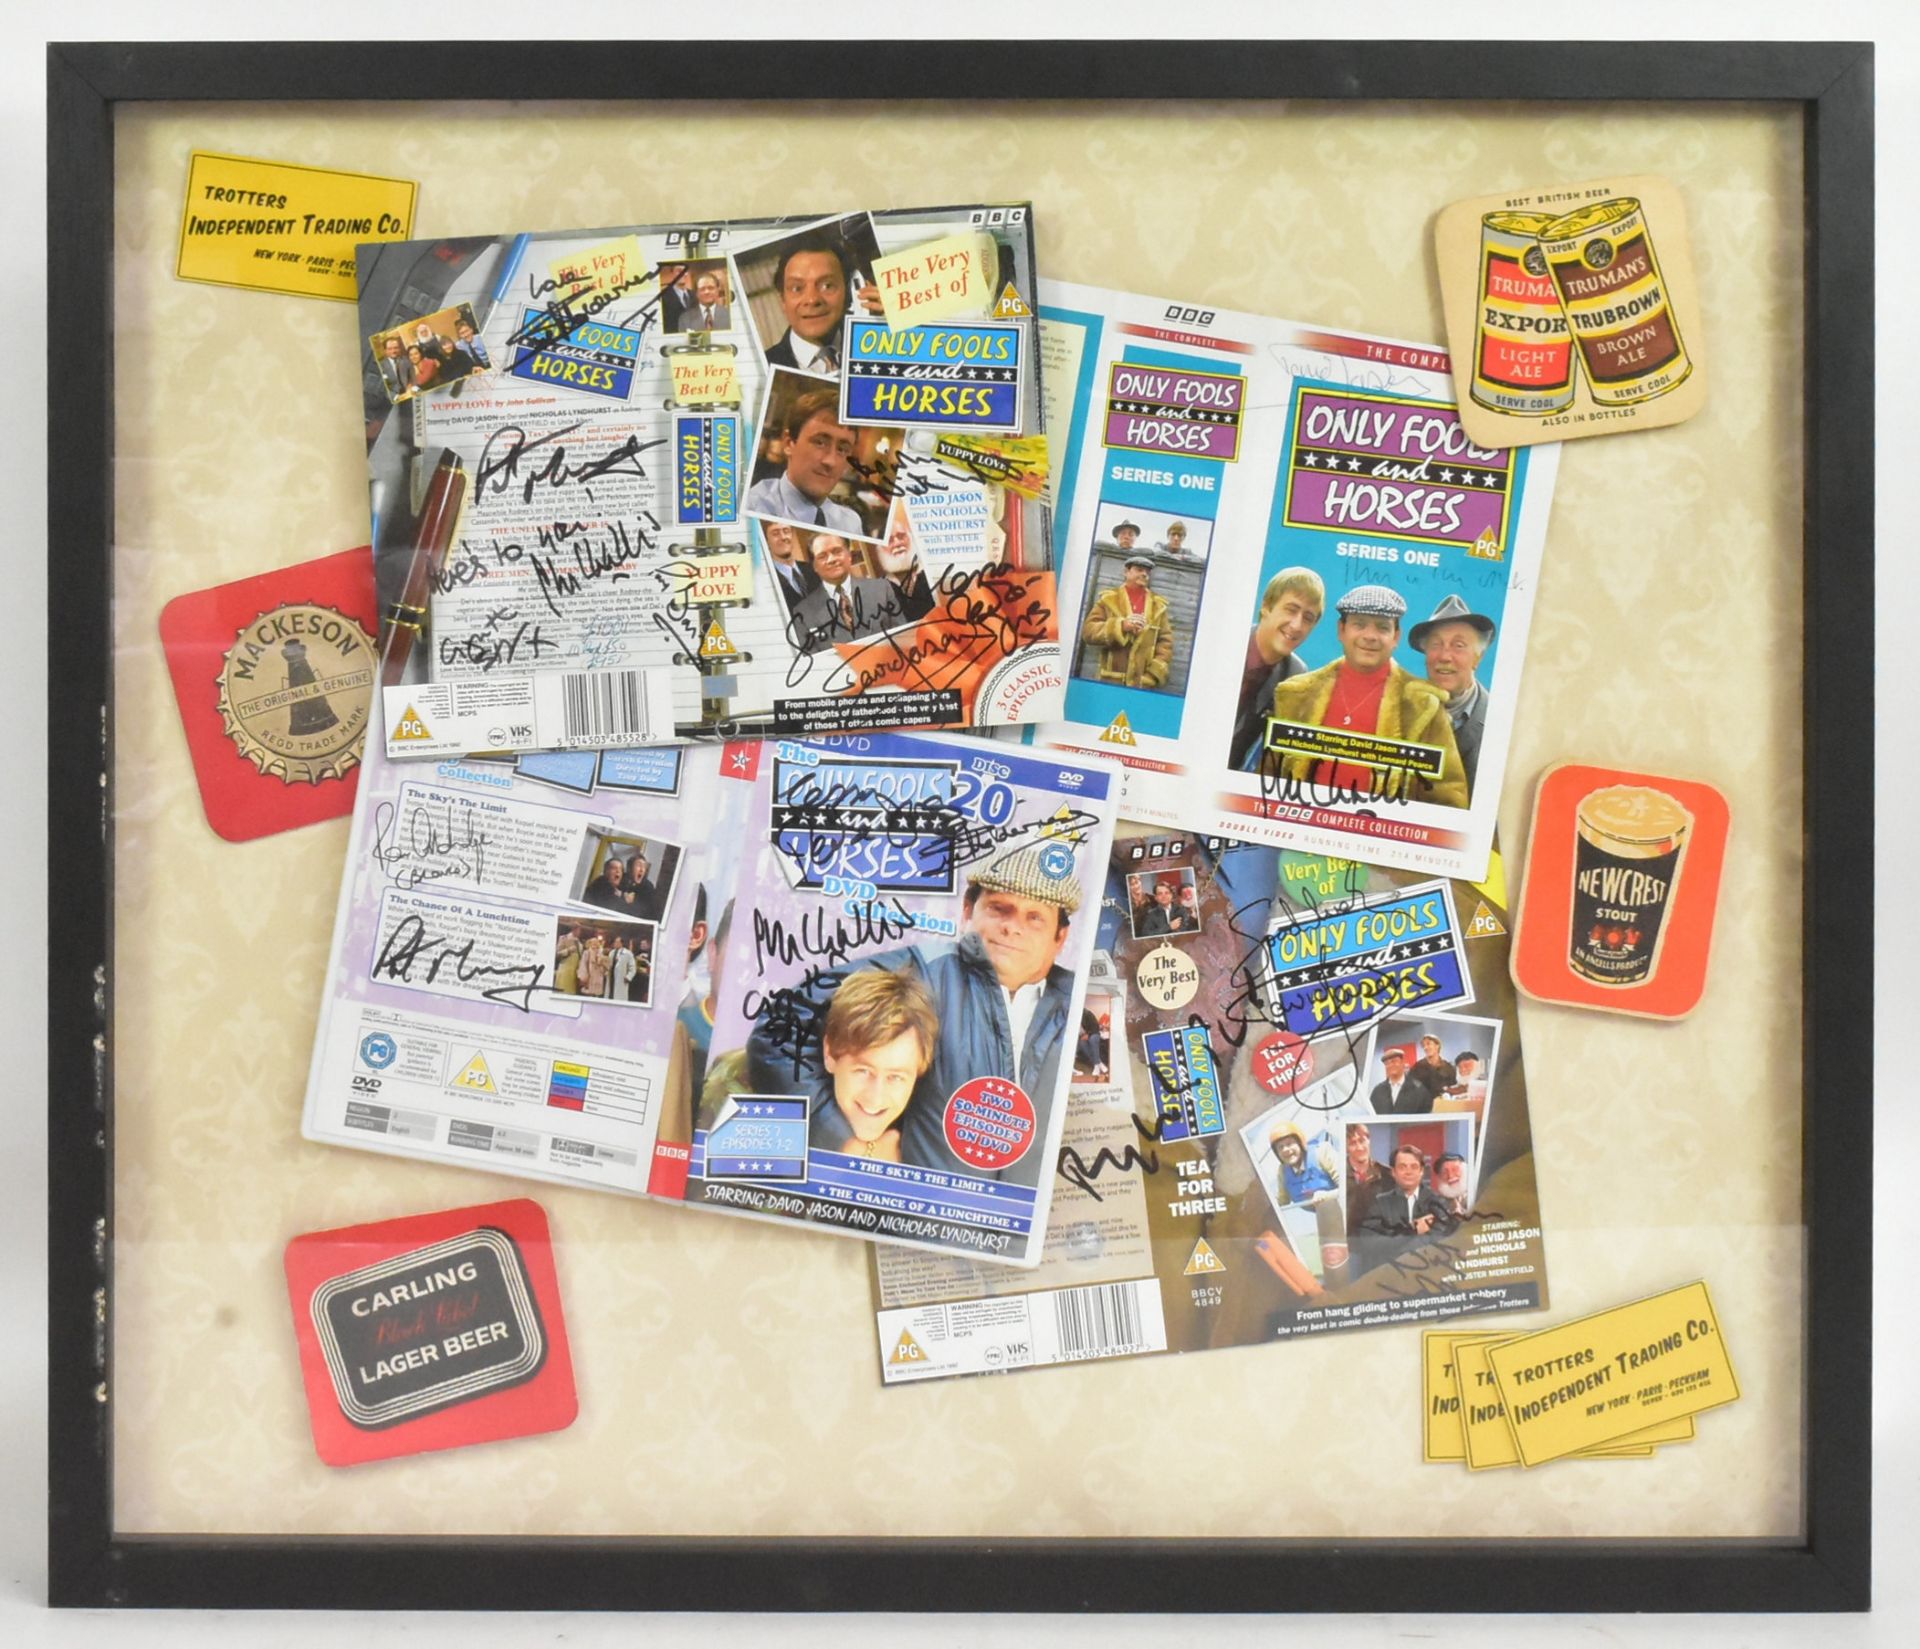 ONLY FOOLS & HORSES - CAST AUTOGRAPHED DISPLAY